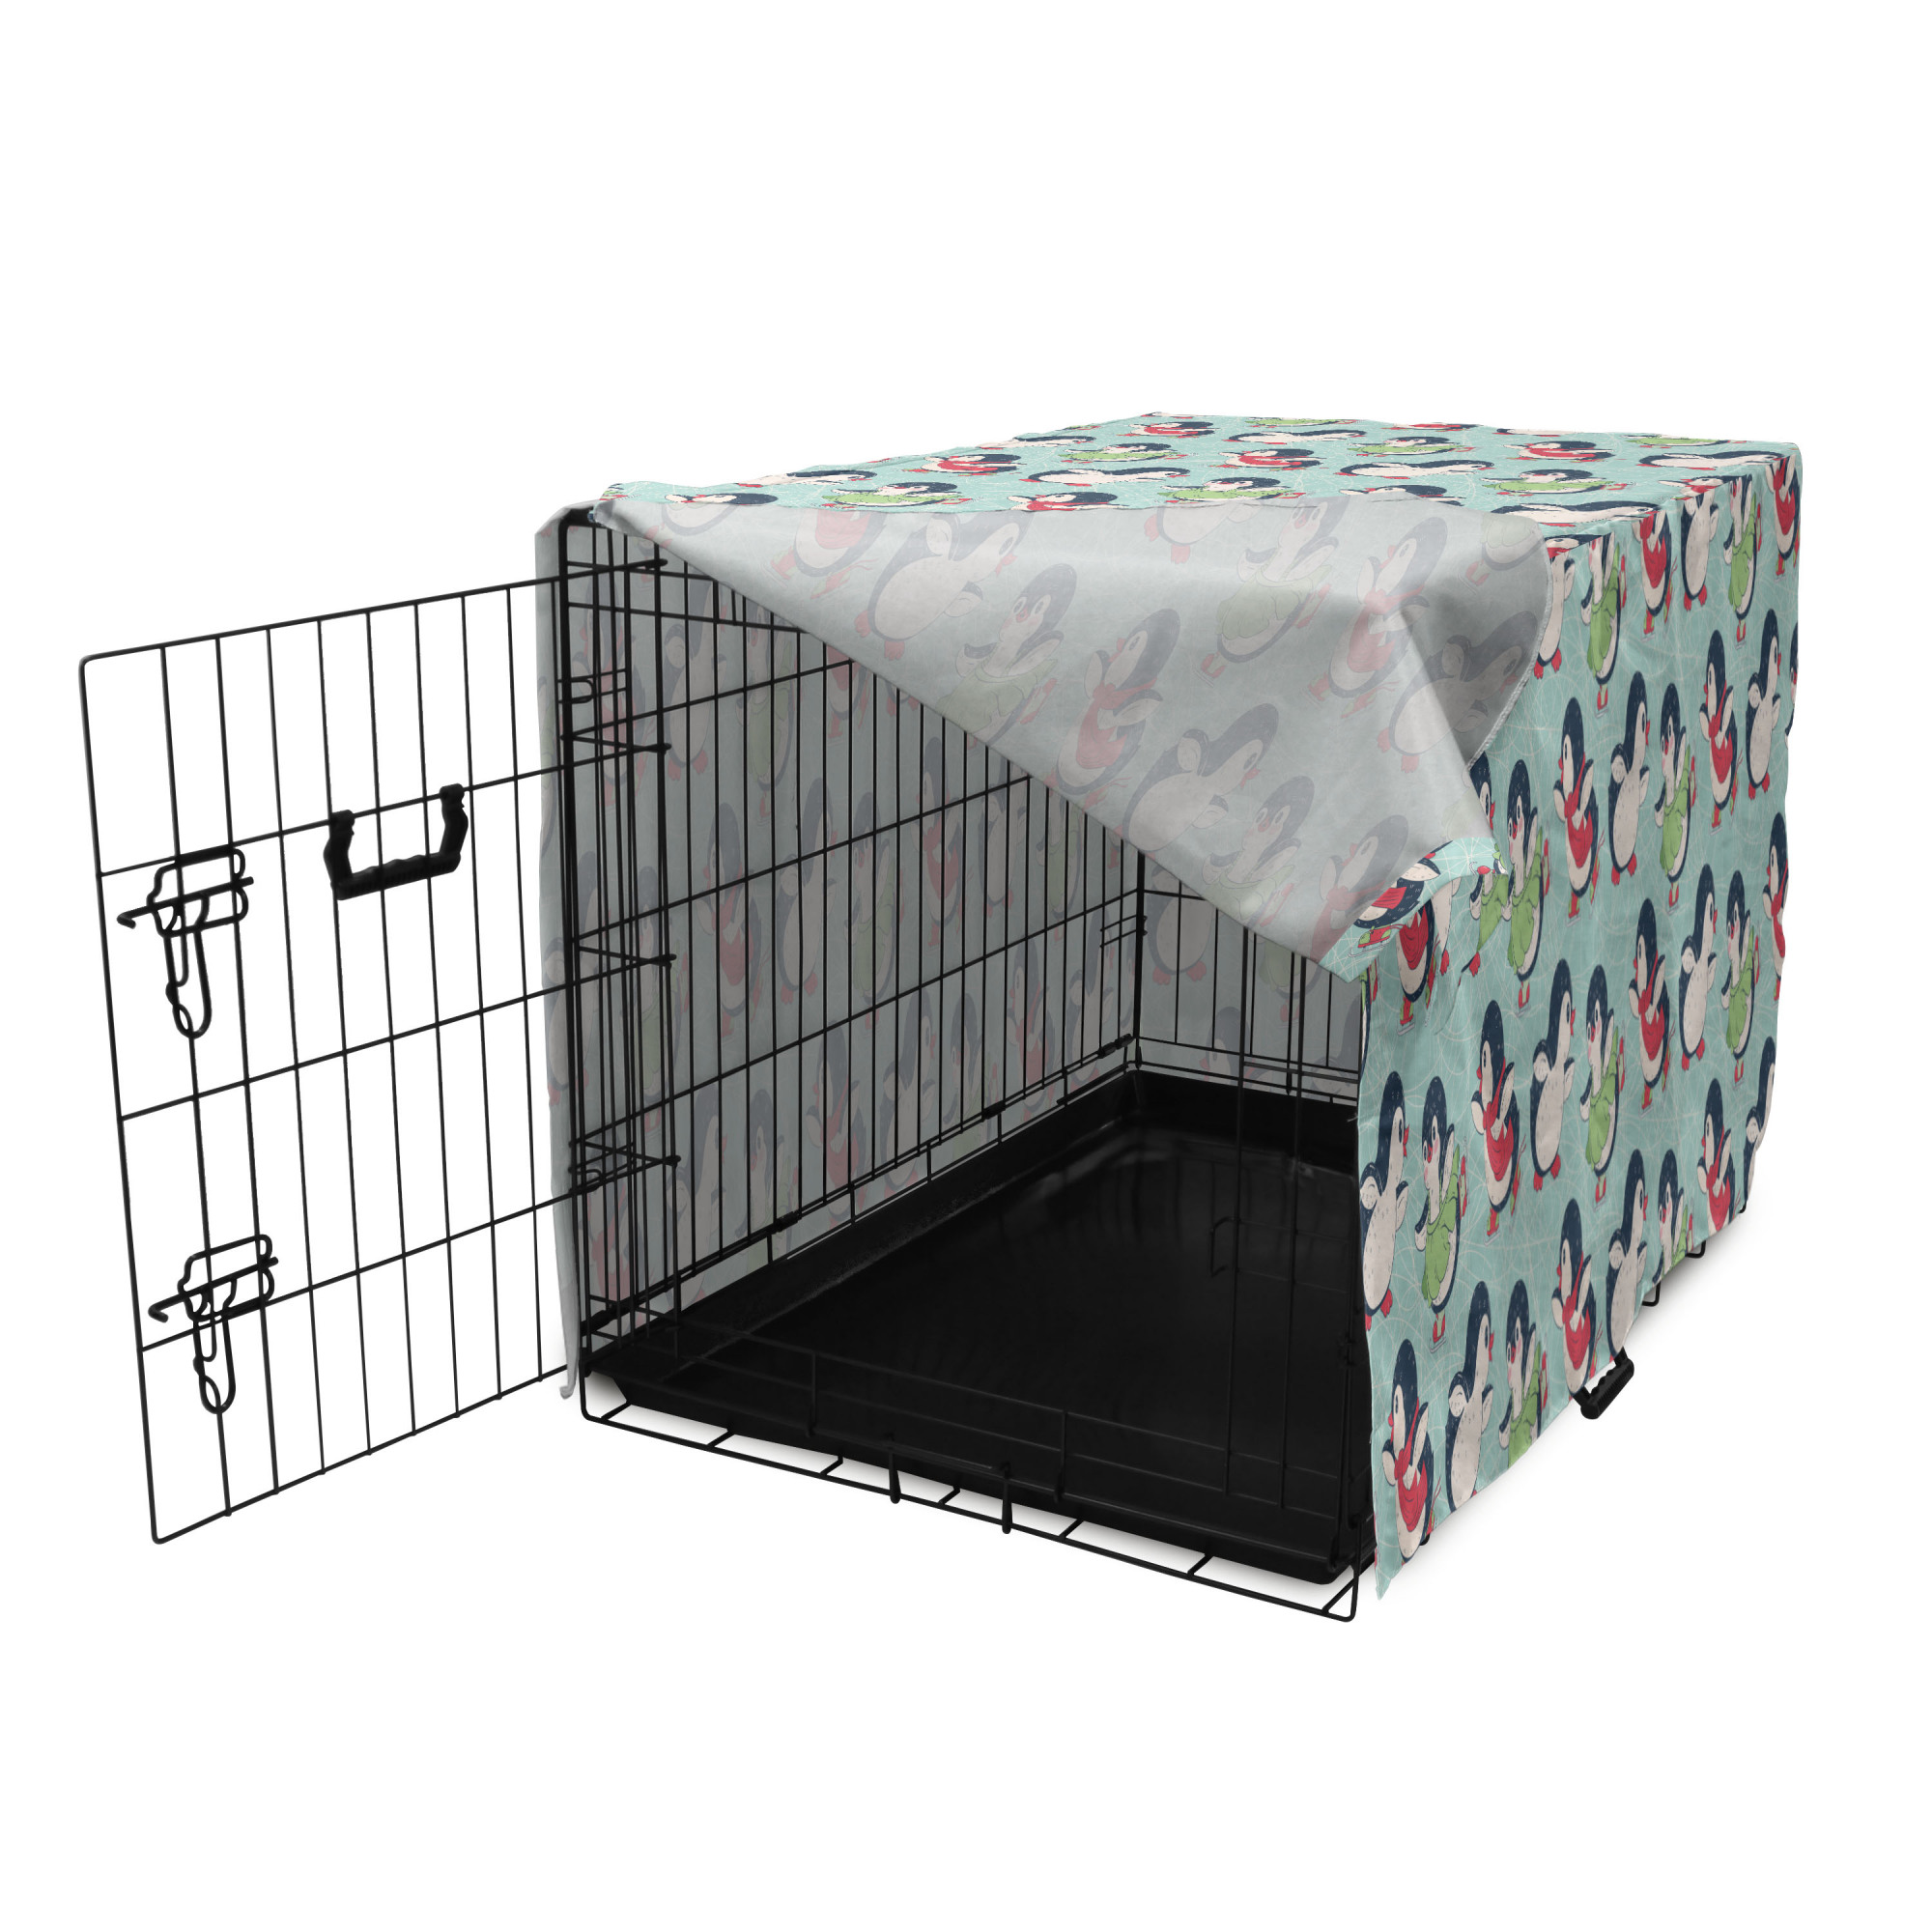 Penguin Dog Crate Cover, Cartoon Arctic Animals Ice Skating with Scarf and Skirts Pattern, Easy to Use Pet Kennel Cover Small Dogs Puppies Kittens, 7 Sizes, Pale Seafoam Multicolor, by Ambesonne - image 3 of 6